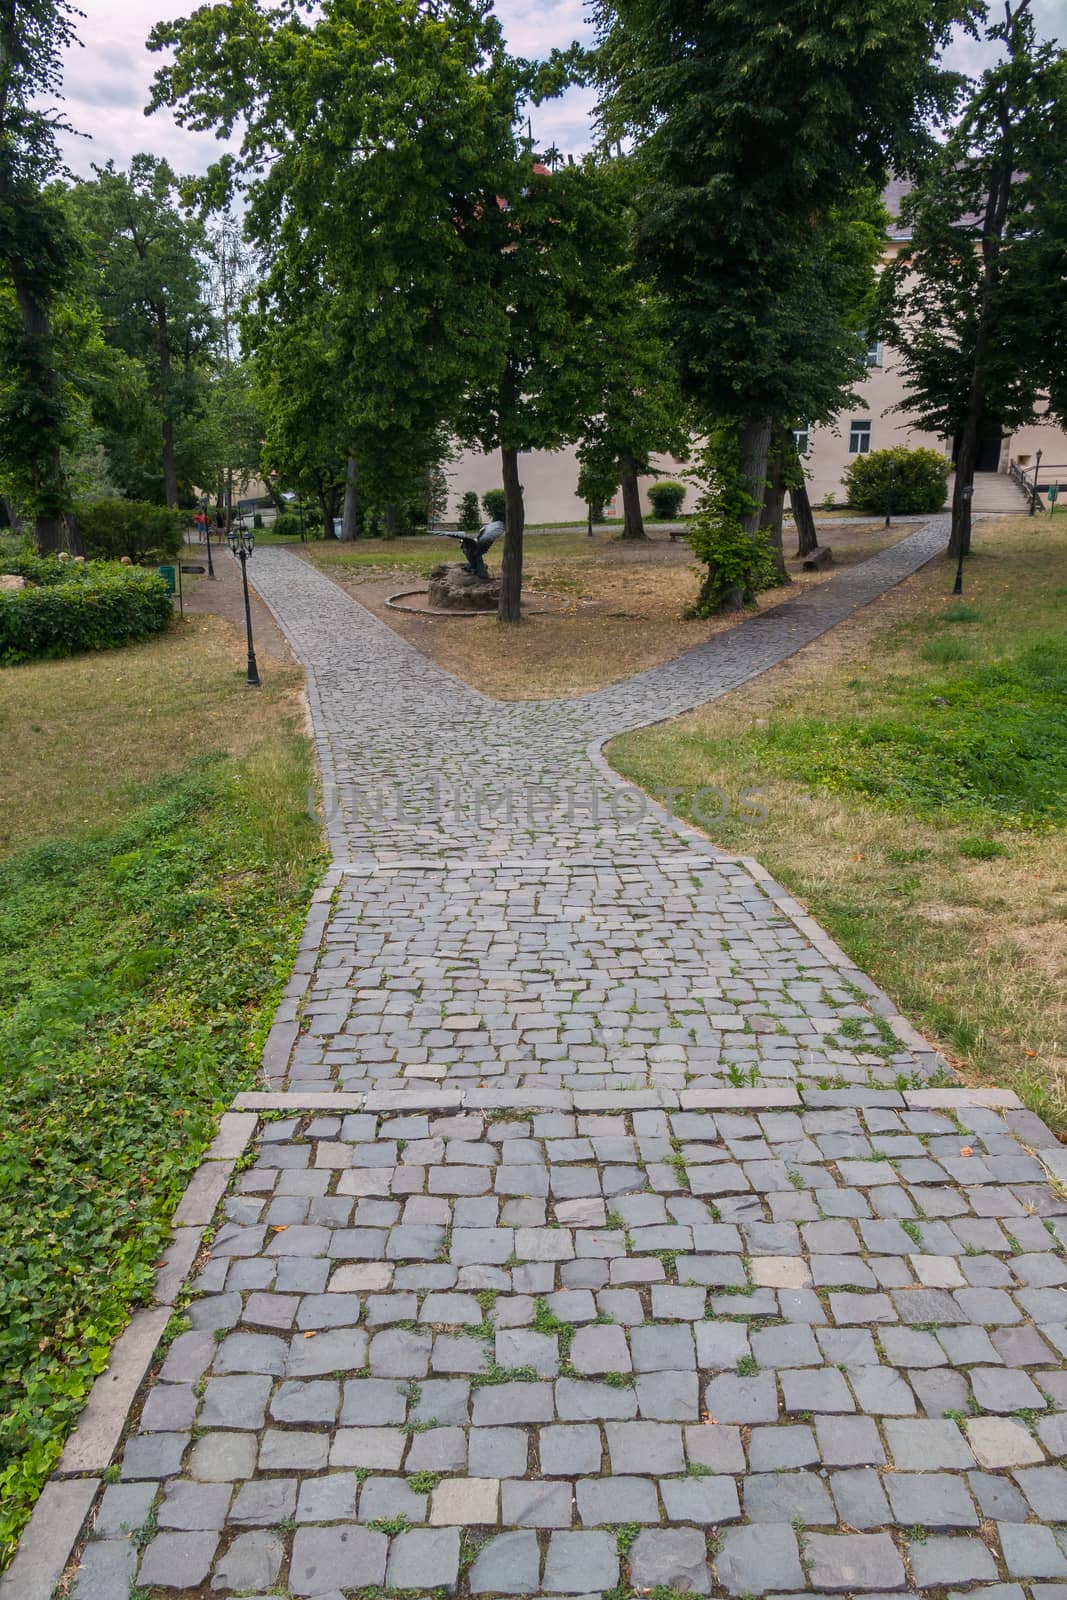 Stepped path in the park running between green trees with standing sculptures on the side of it and leading to the building in the distance. by Adamchuk